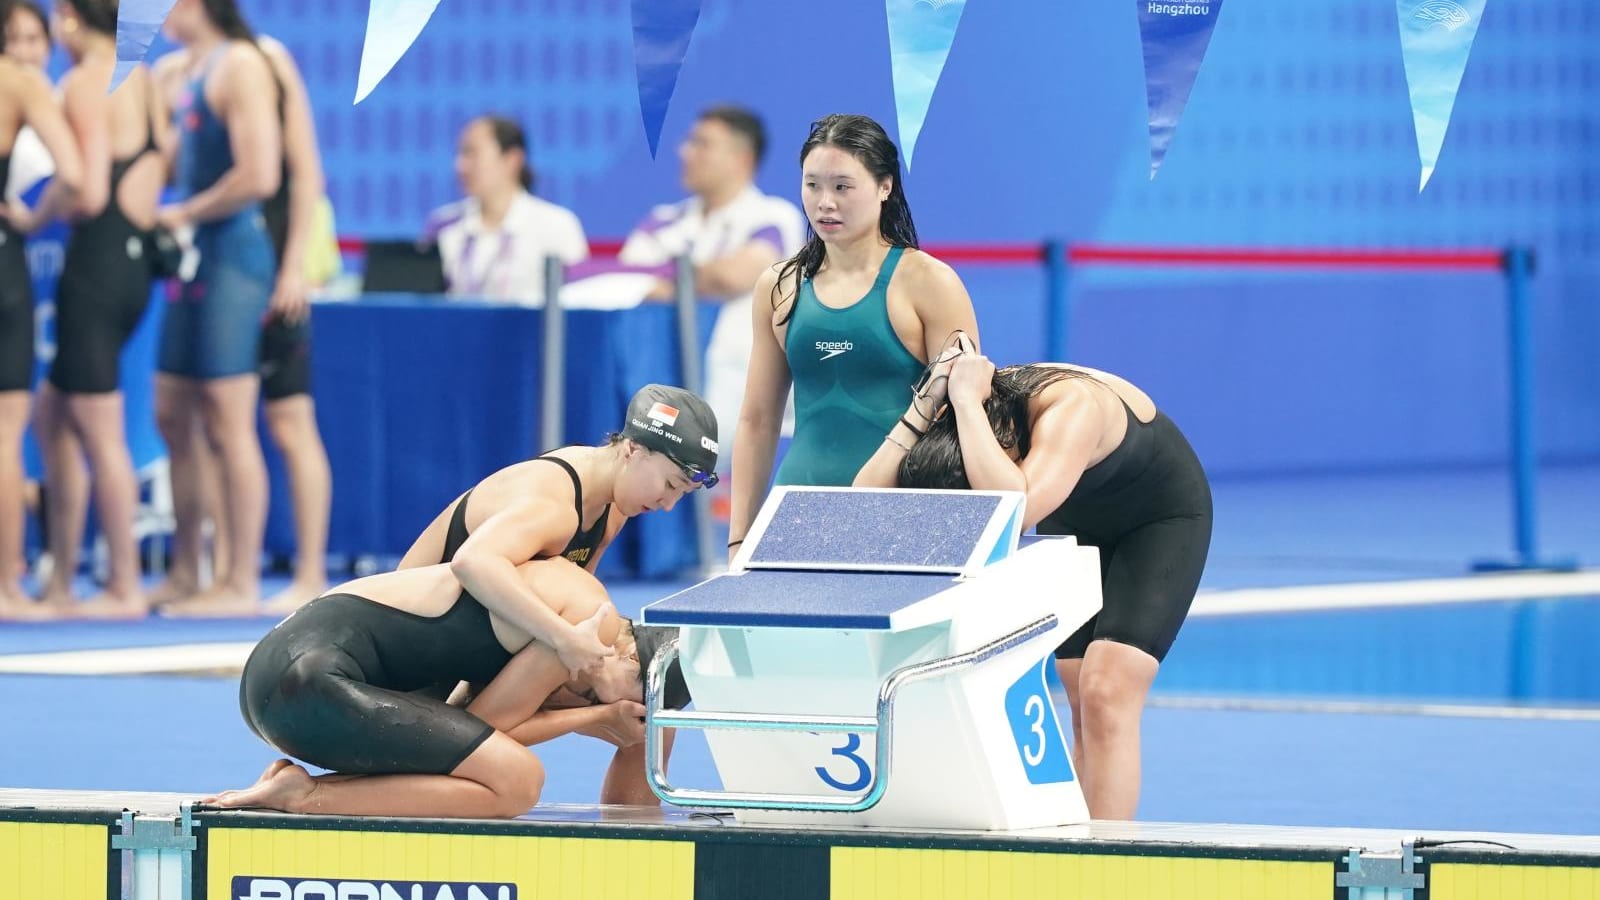 Tears for Singapore women’s 4x100m medley squad after disqualification denies team Asian Games bronze